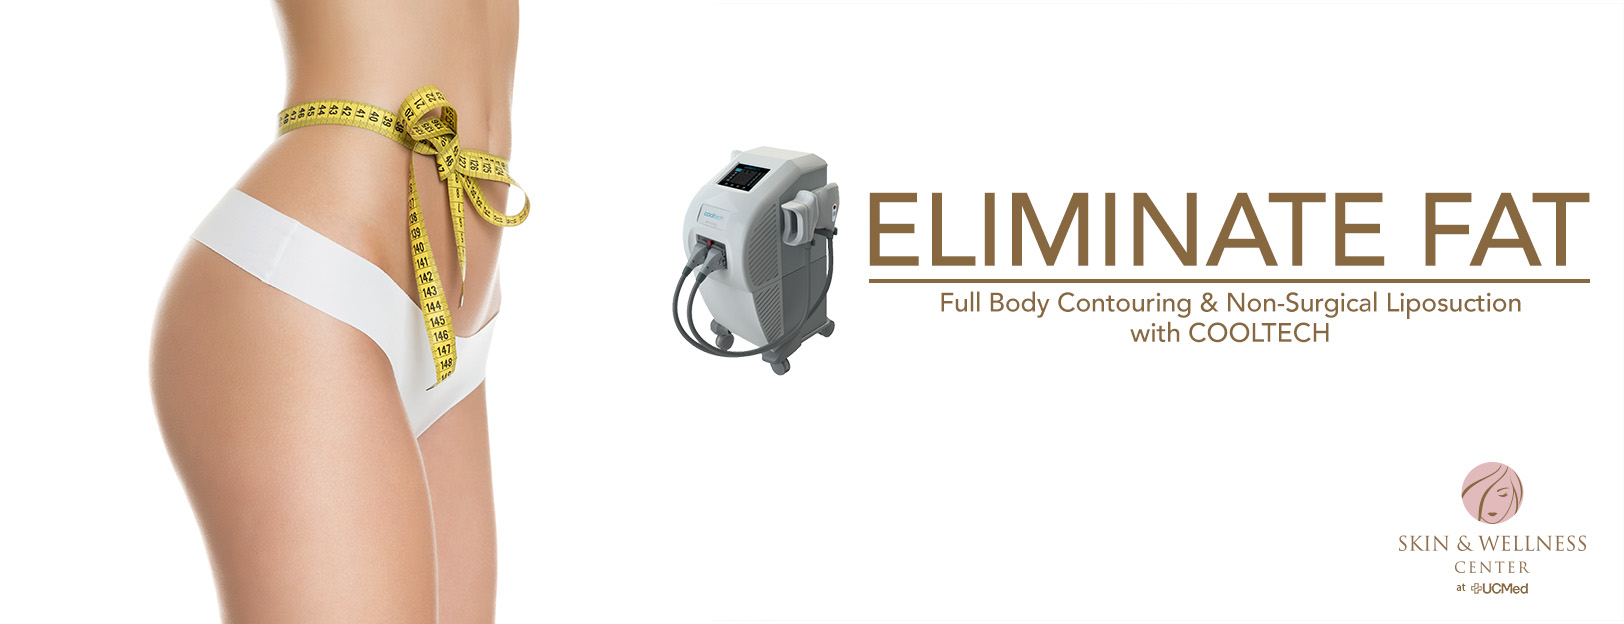 Eliminate FAT with Cooltech Fat Freezing Treatments